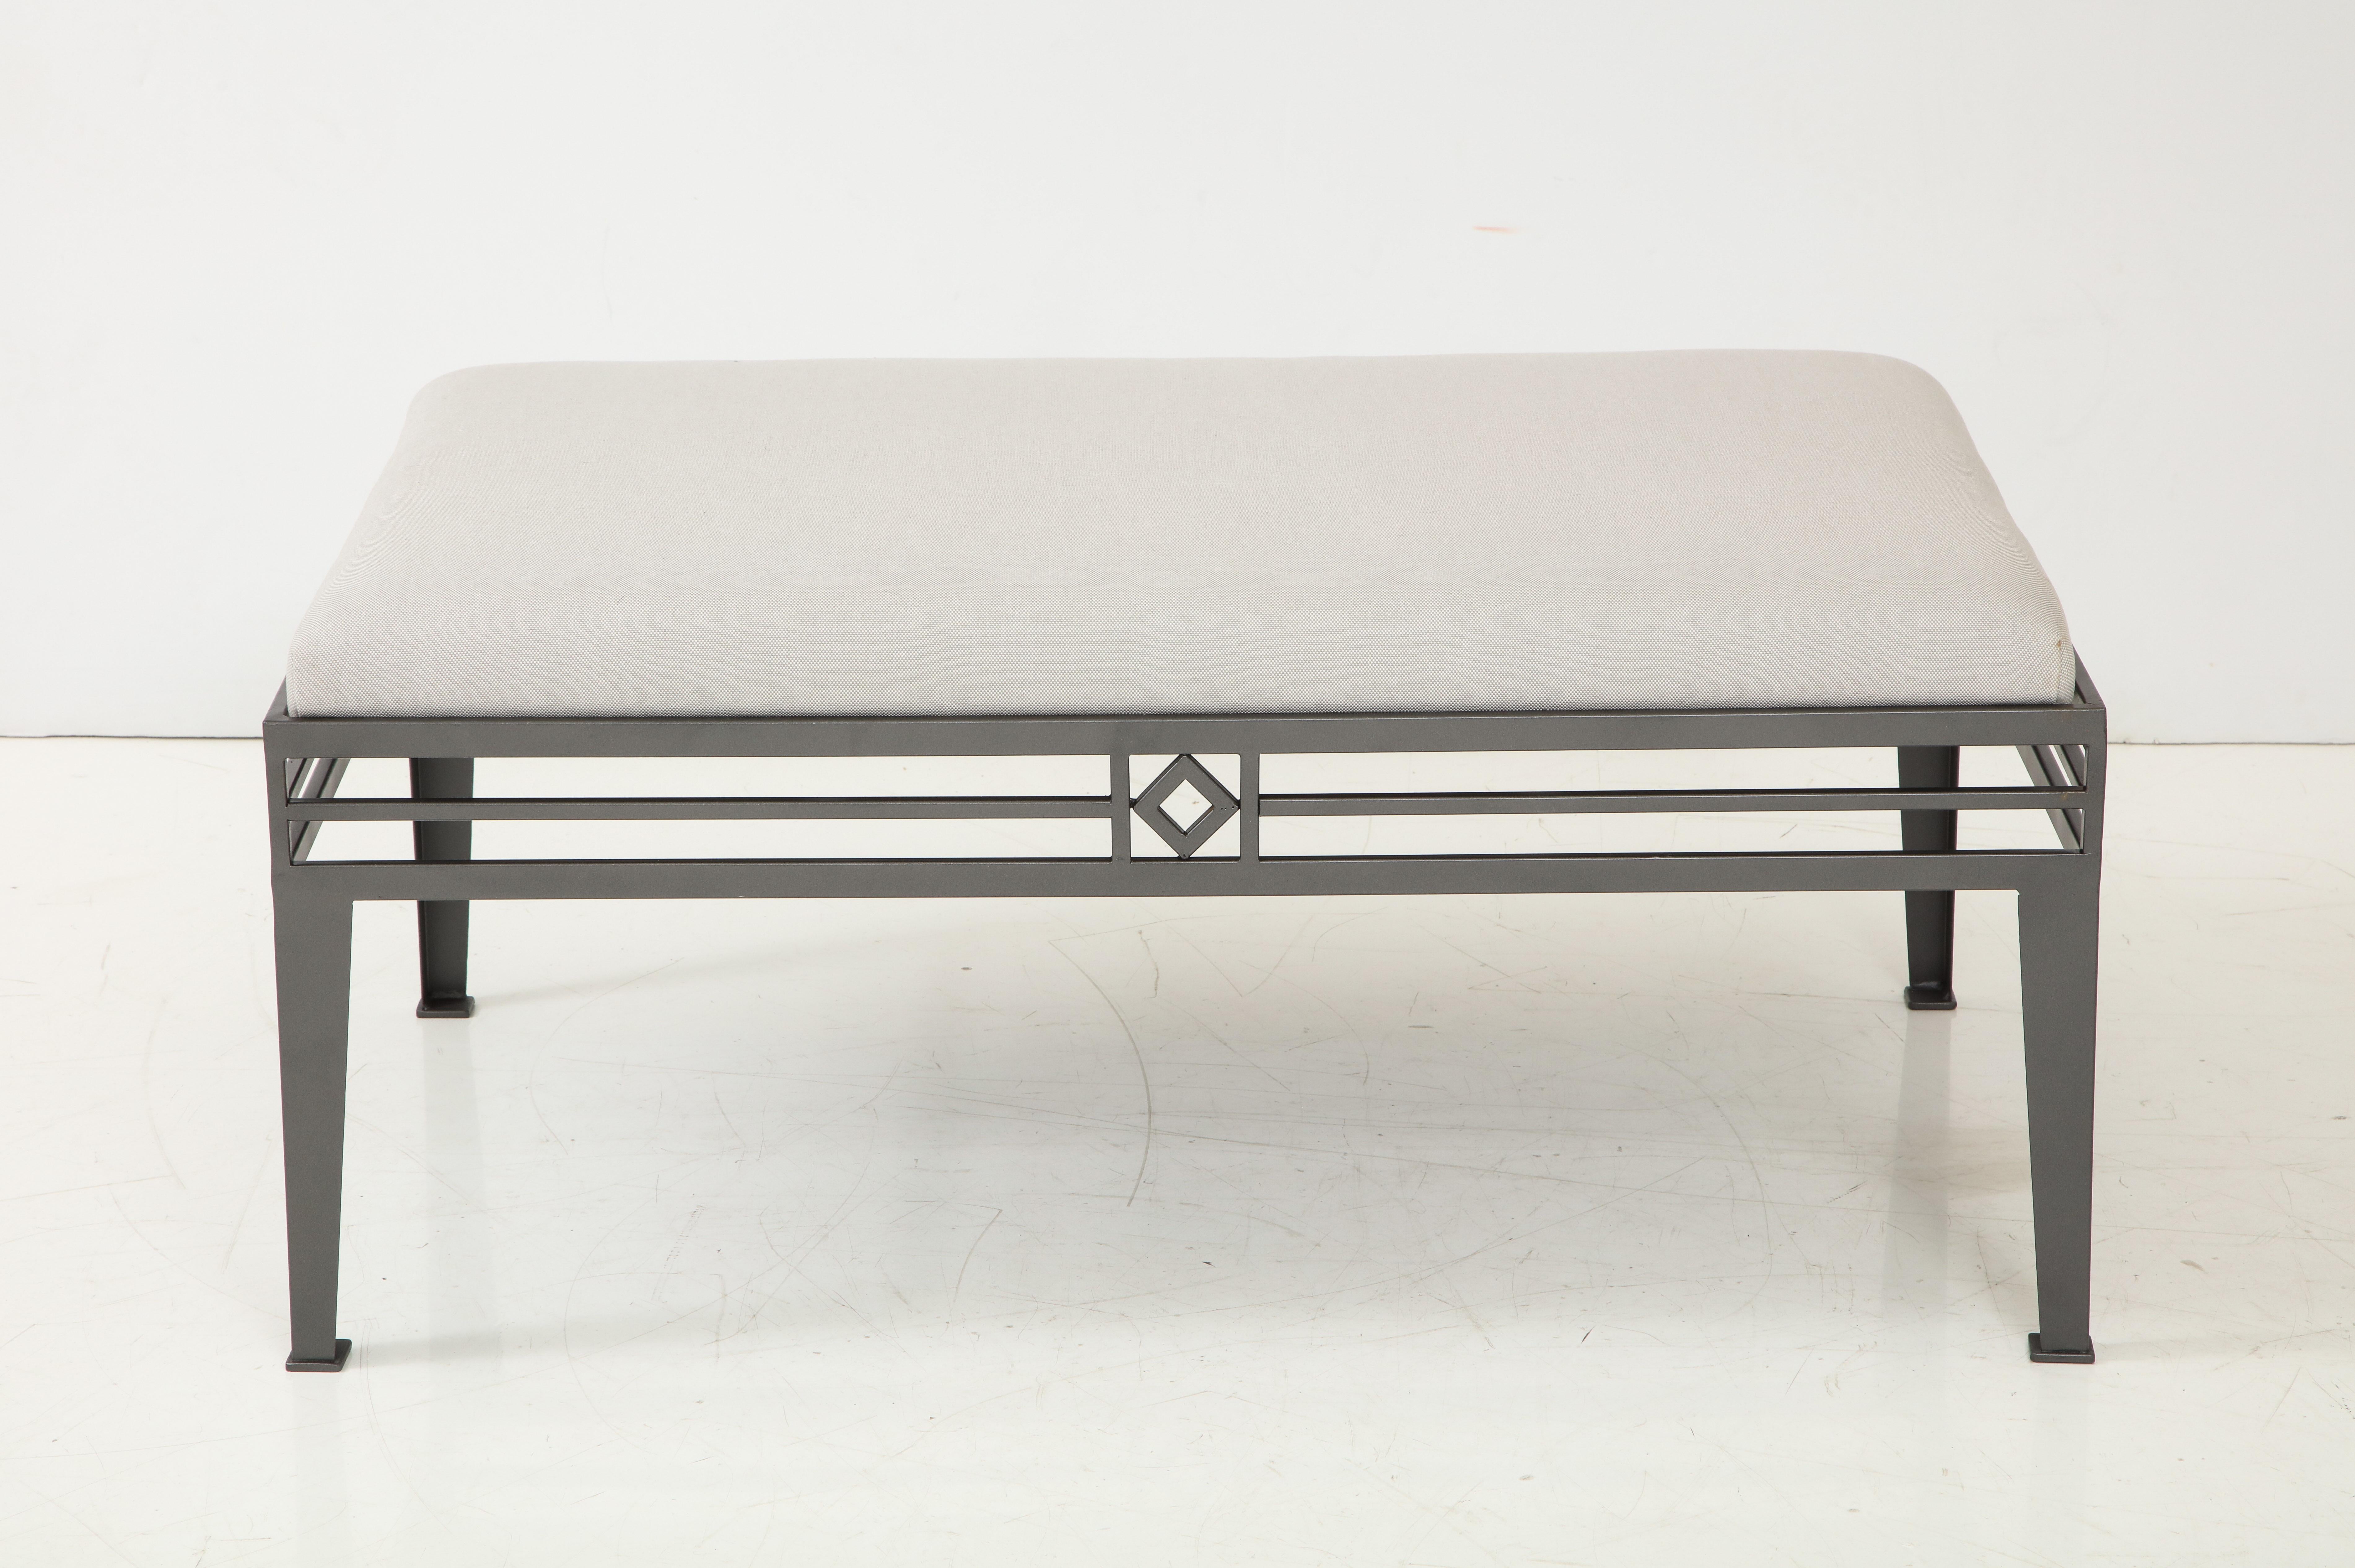 Set of three outdoor benches.
The Geometric design Aluminum frame has been newly re powder coated in a steel gray finish.
The cushions have also been newly reupholstered in as sunbrella fabric.